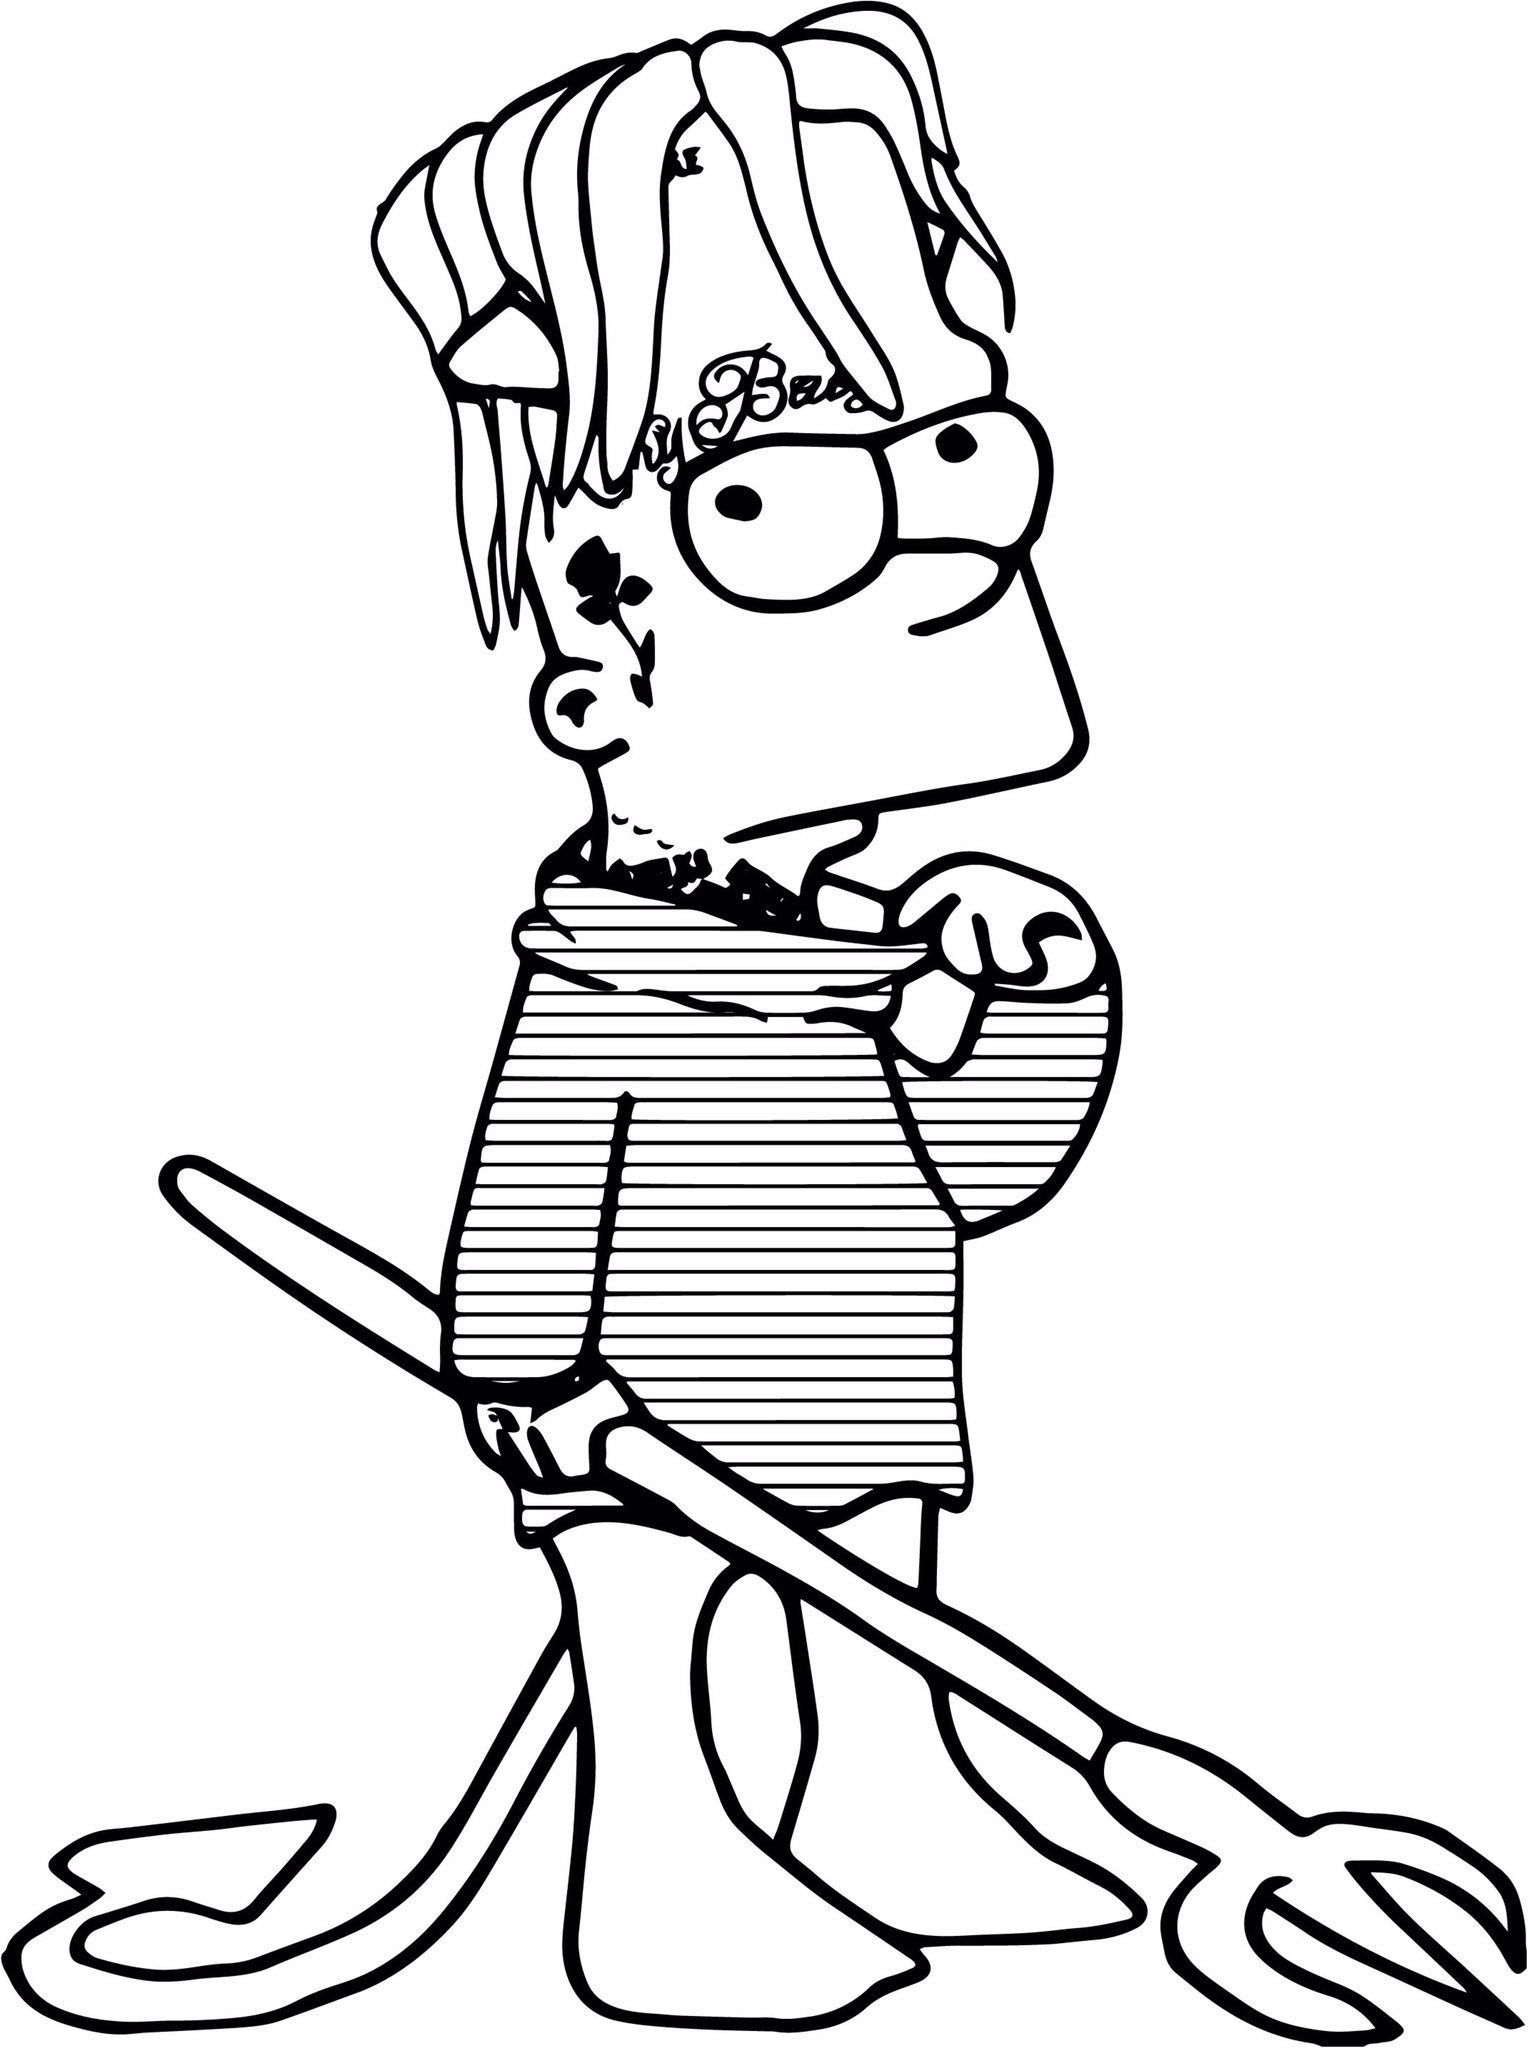 Lil Peep Hellboy Bart Simpson Coloring Page : ColoringSheet - Coloring Home...